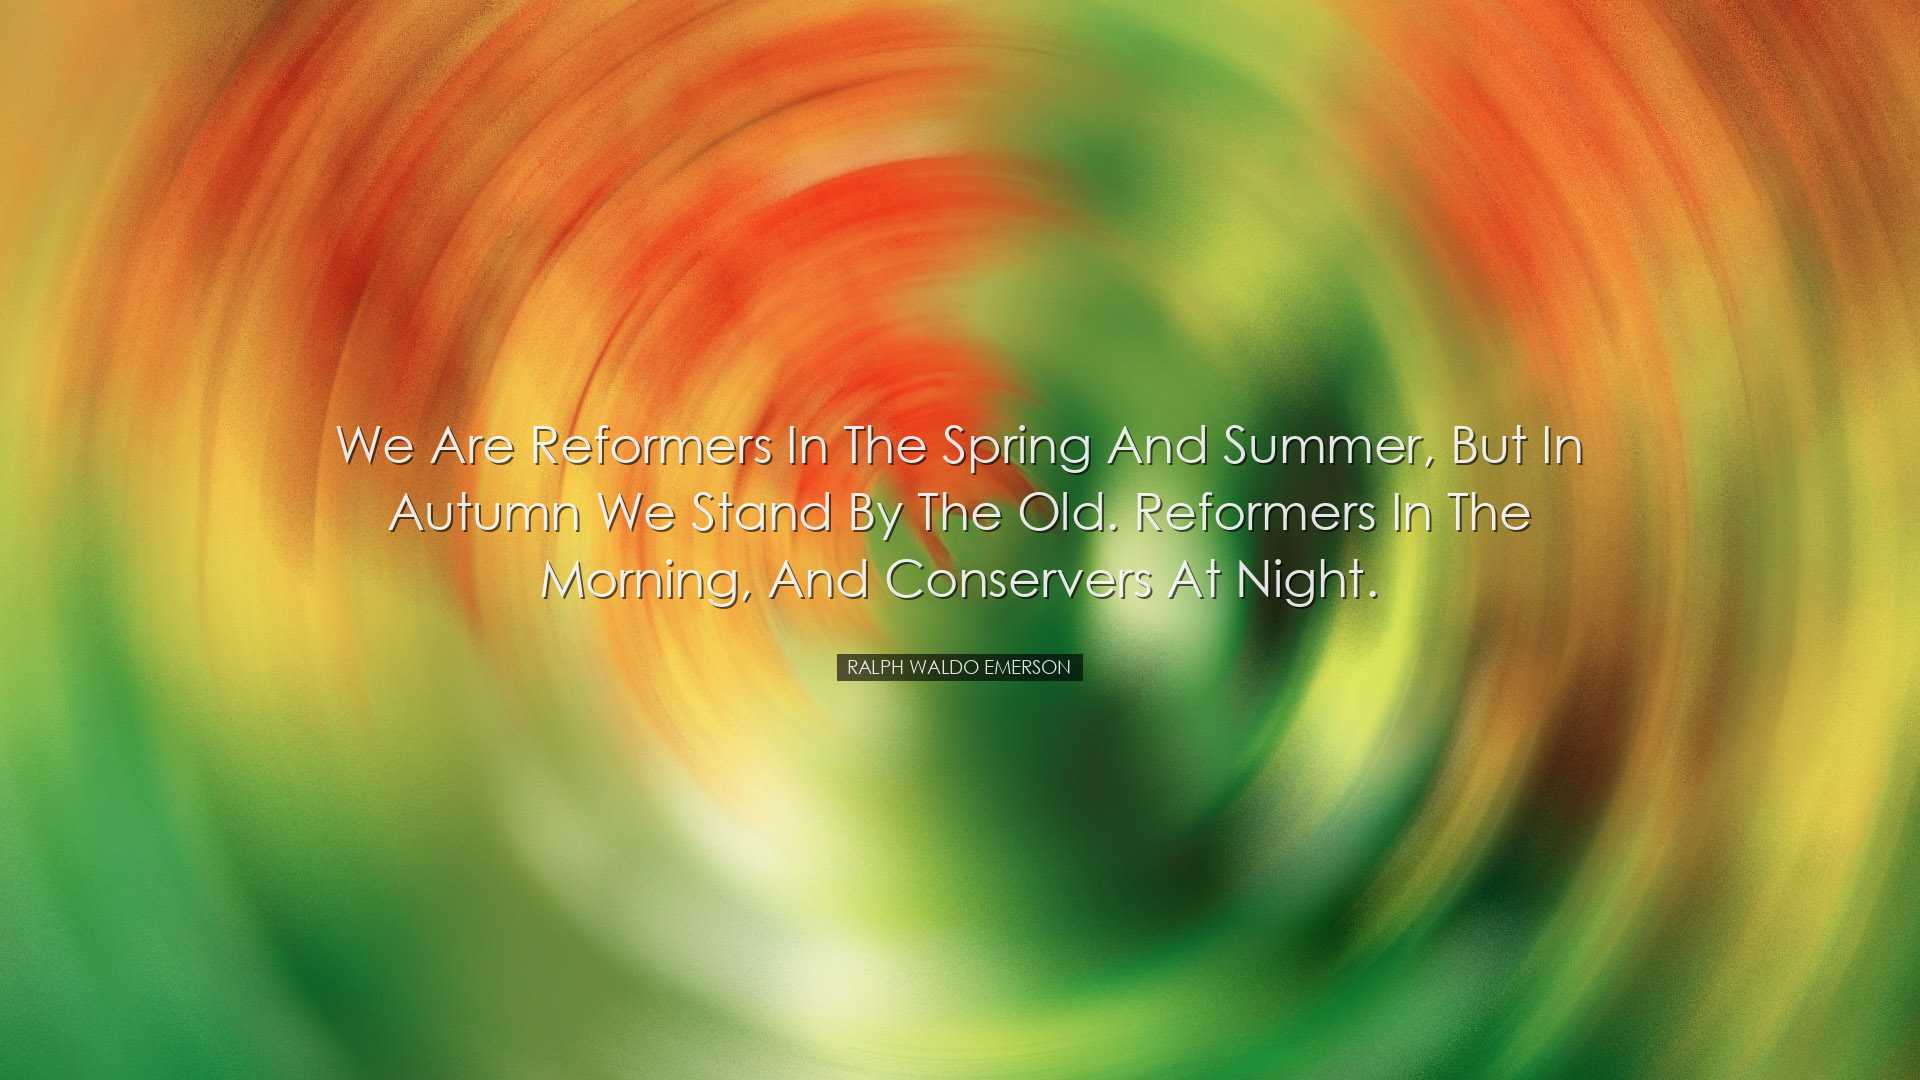 We are reformers in the spring and summer, but in autumn we stand